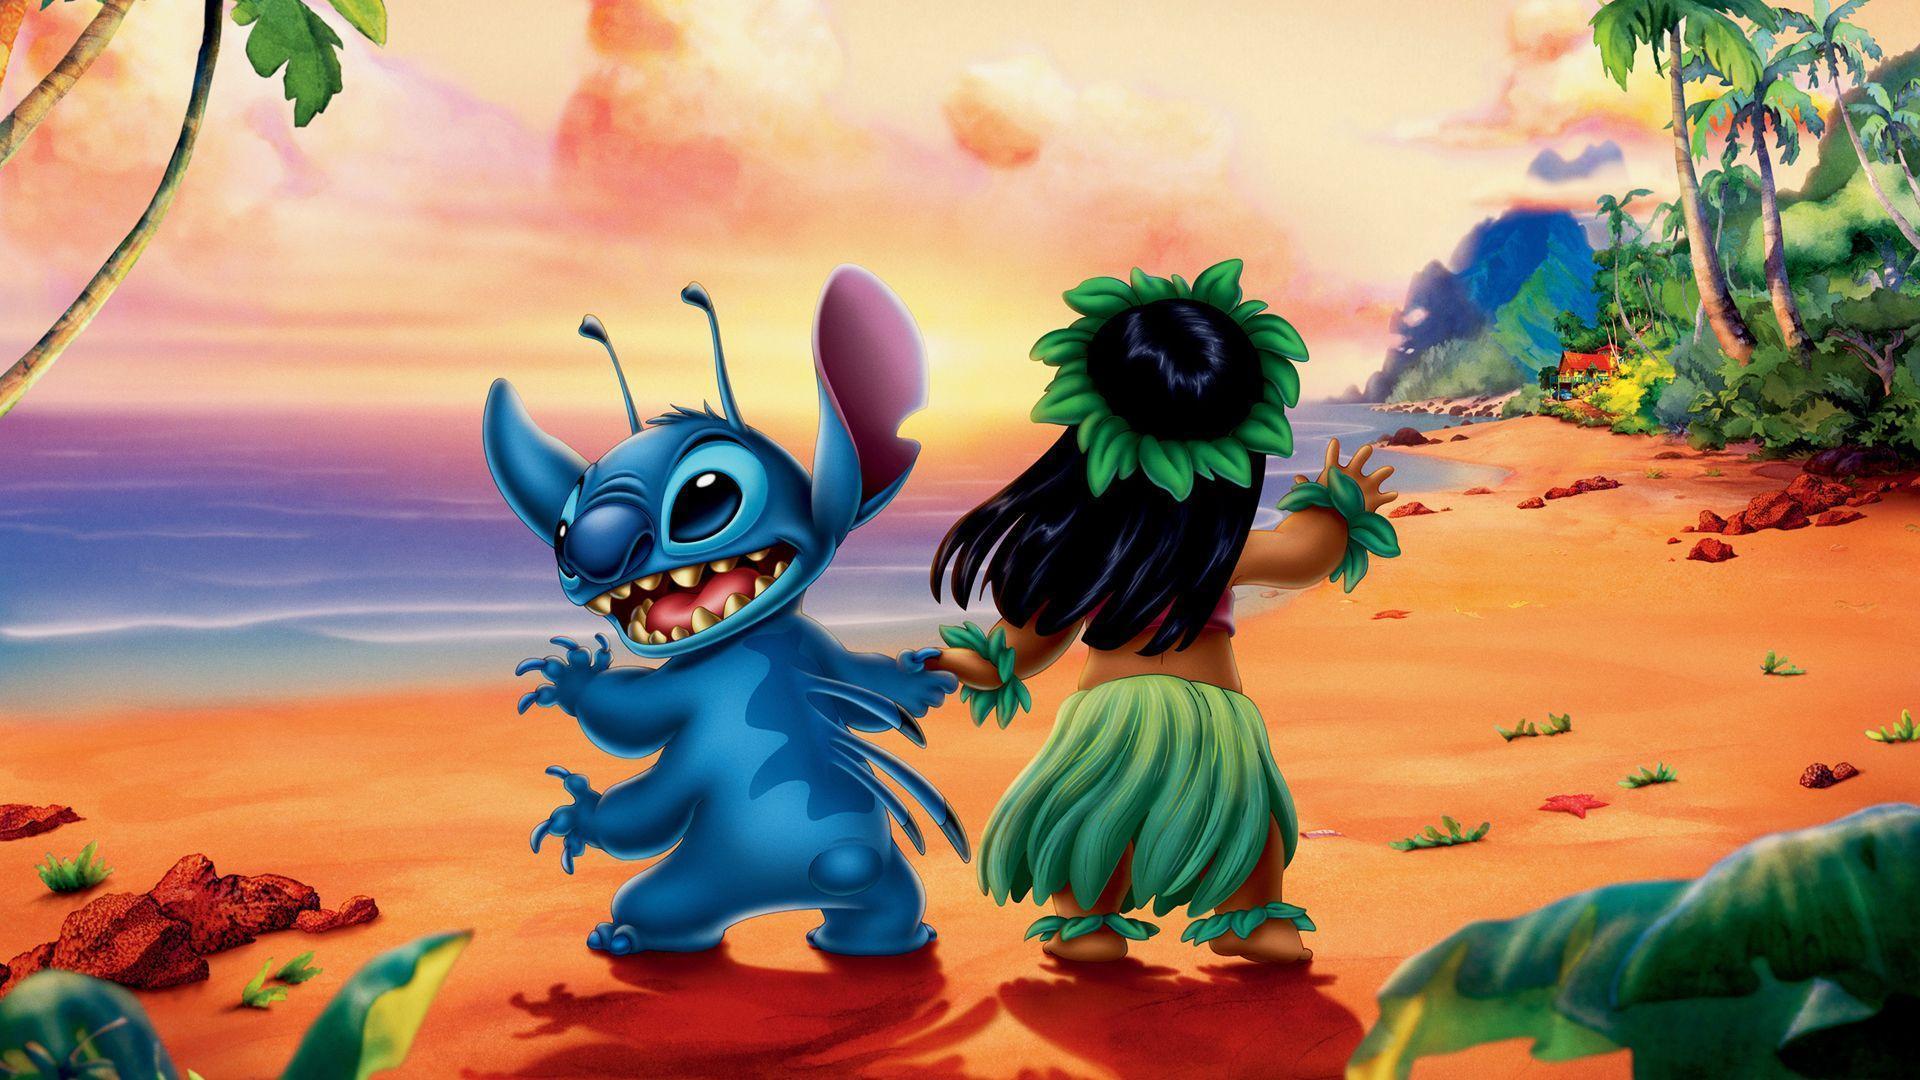 Stitch wallpaper by Crazykena  Download on ZEDGE  abce